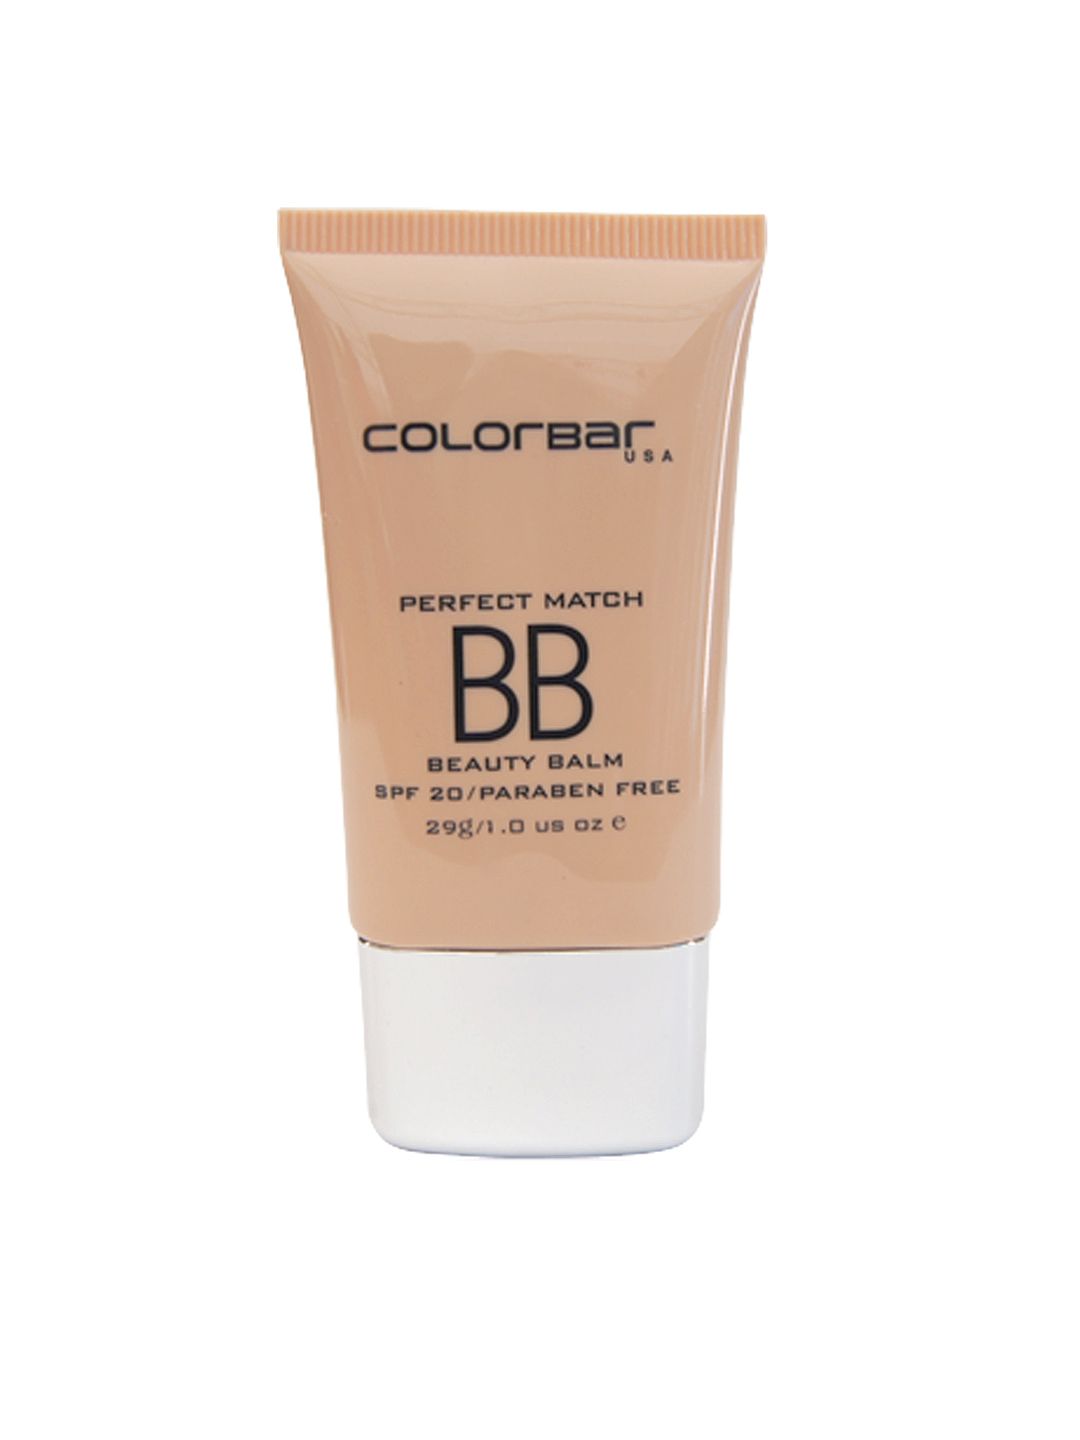 Colorbar Perfect Match Beauty Balm - Vanilla Creme 29 g Price in India